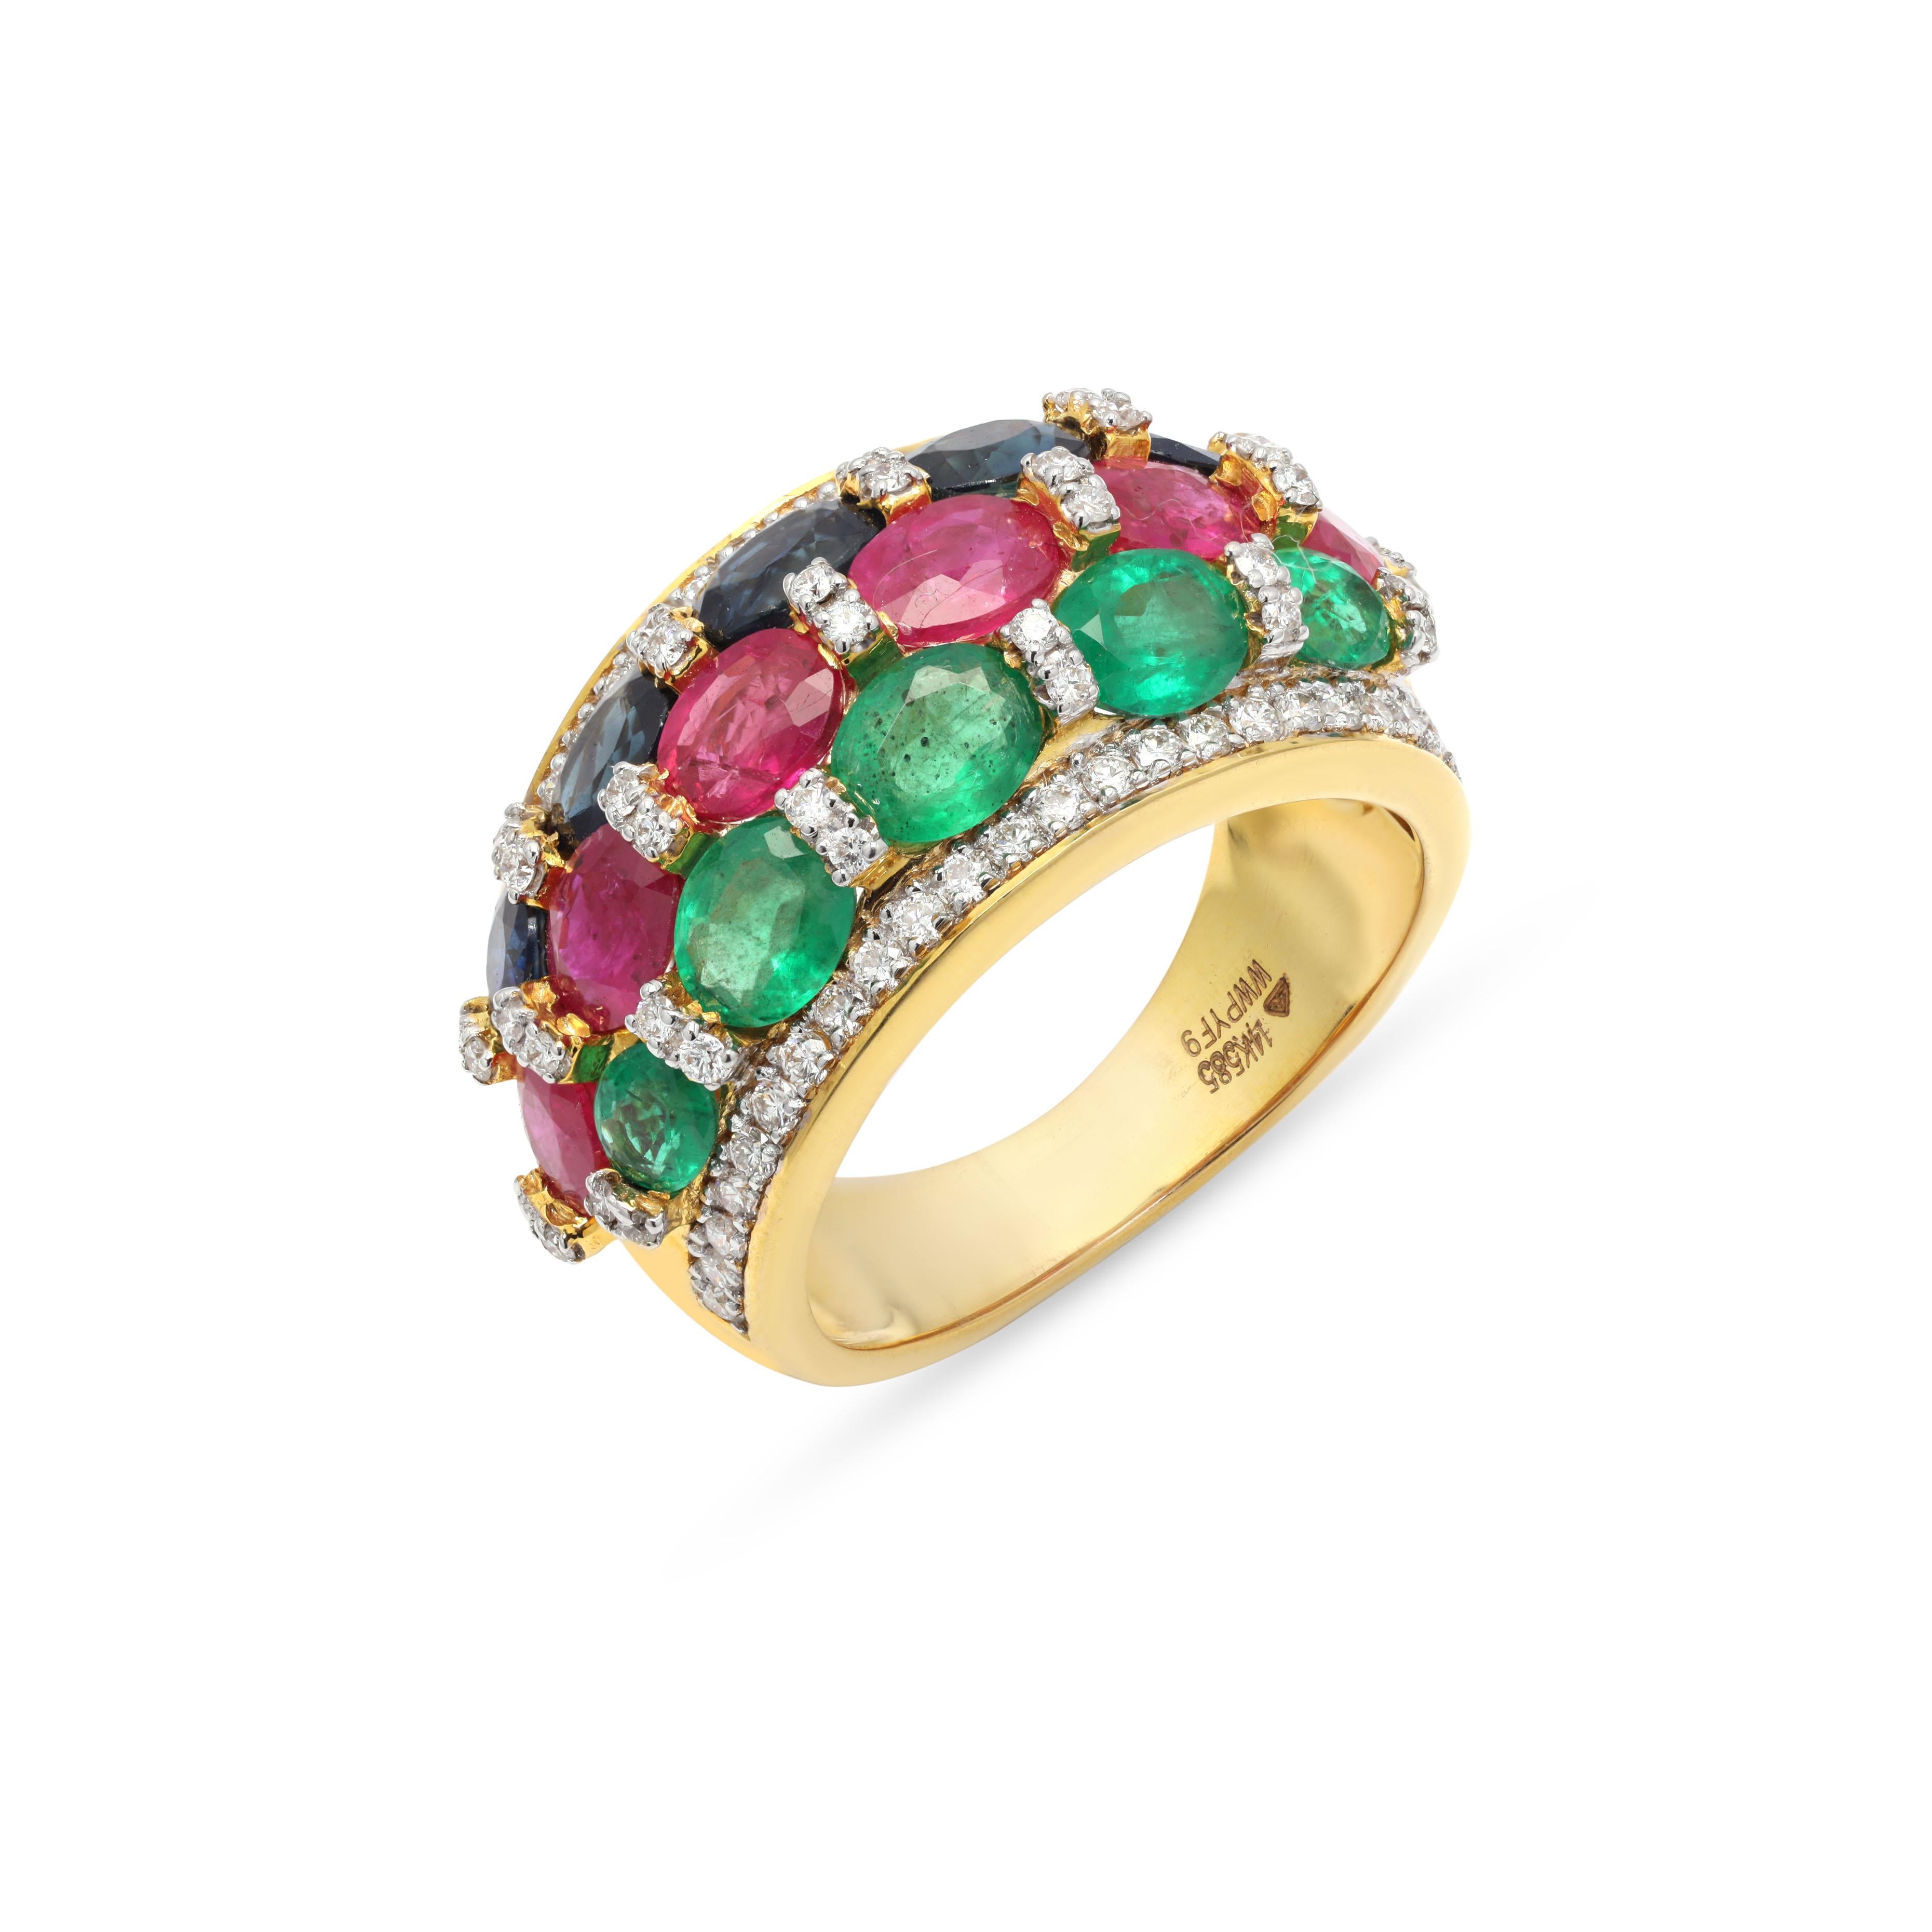 For Sale:  Emerald Ruby Sapphire Wedding Band Ring with Diamonds in 14k Yellow Gold 6